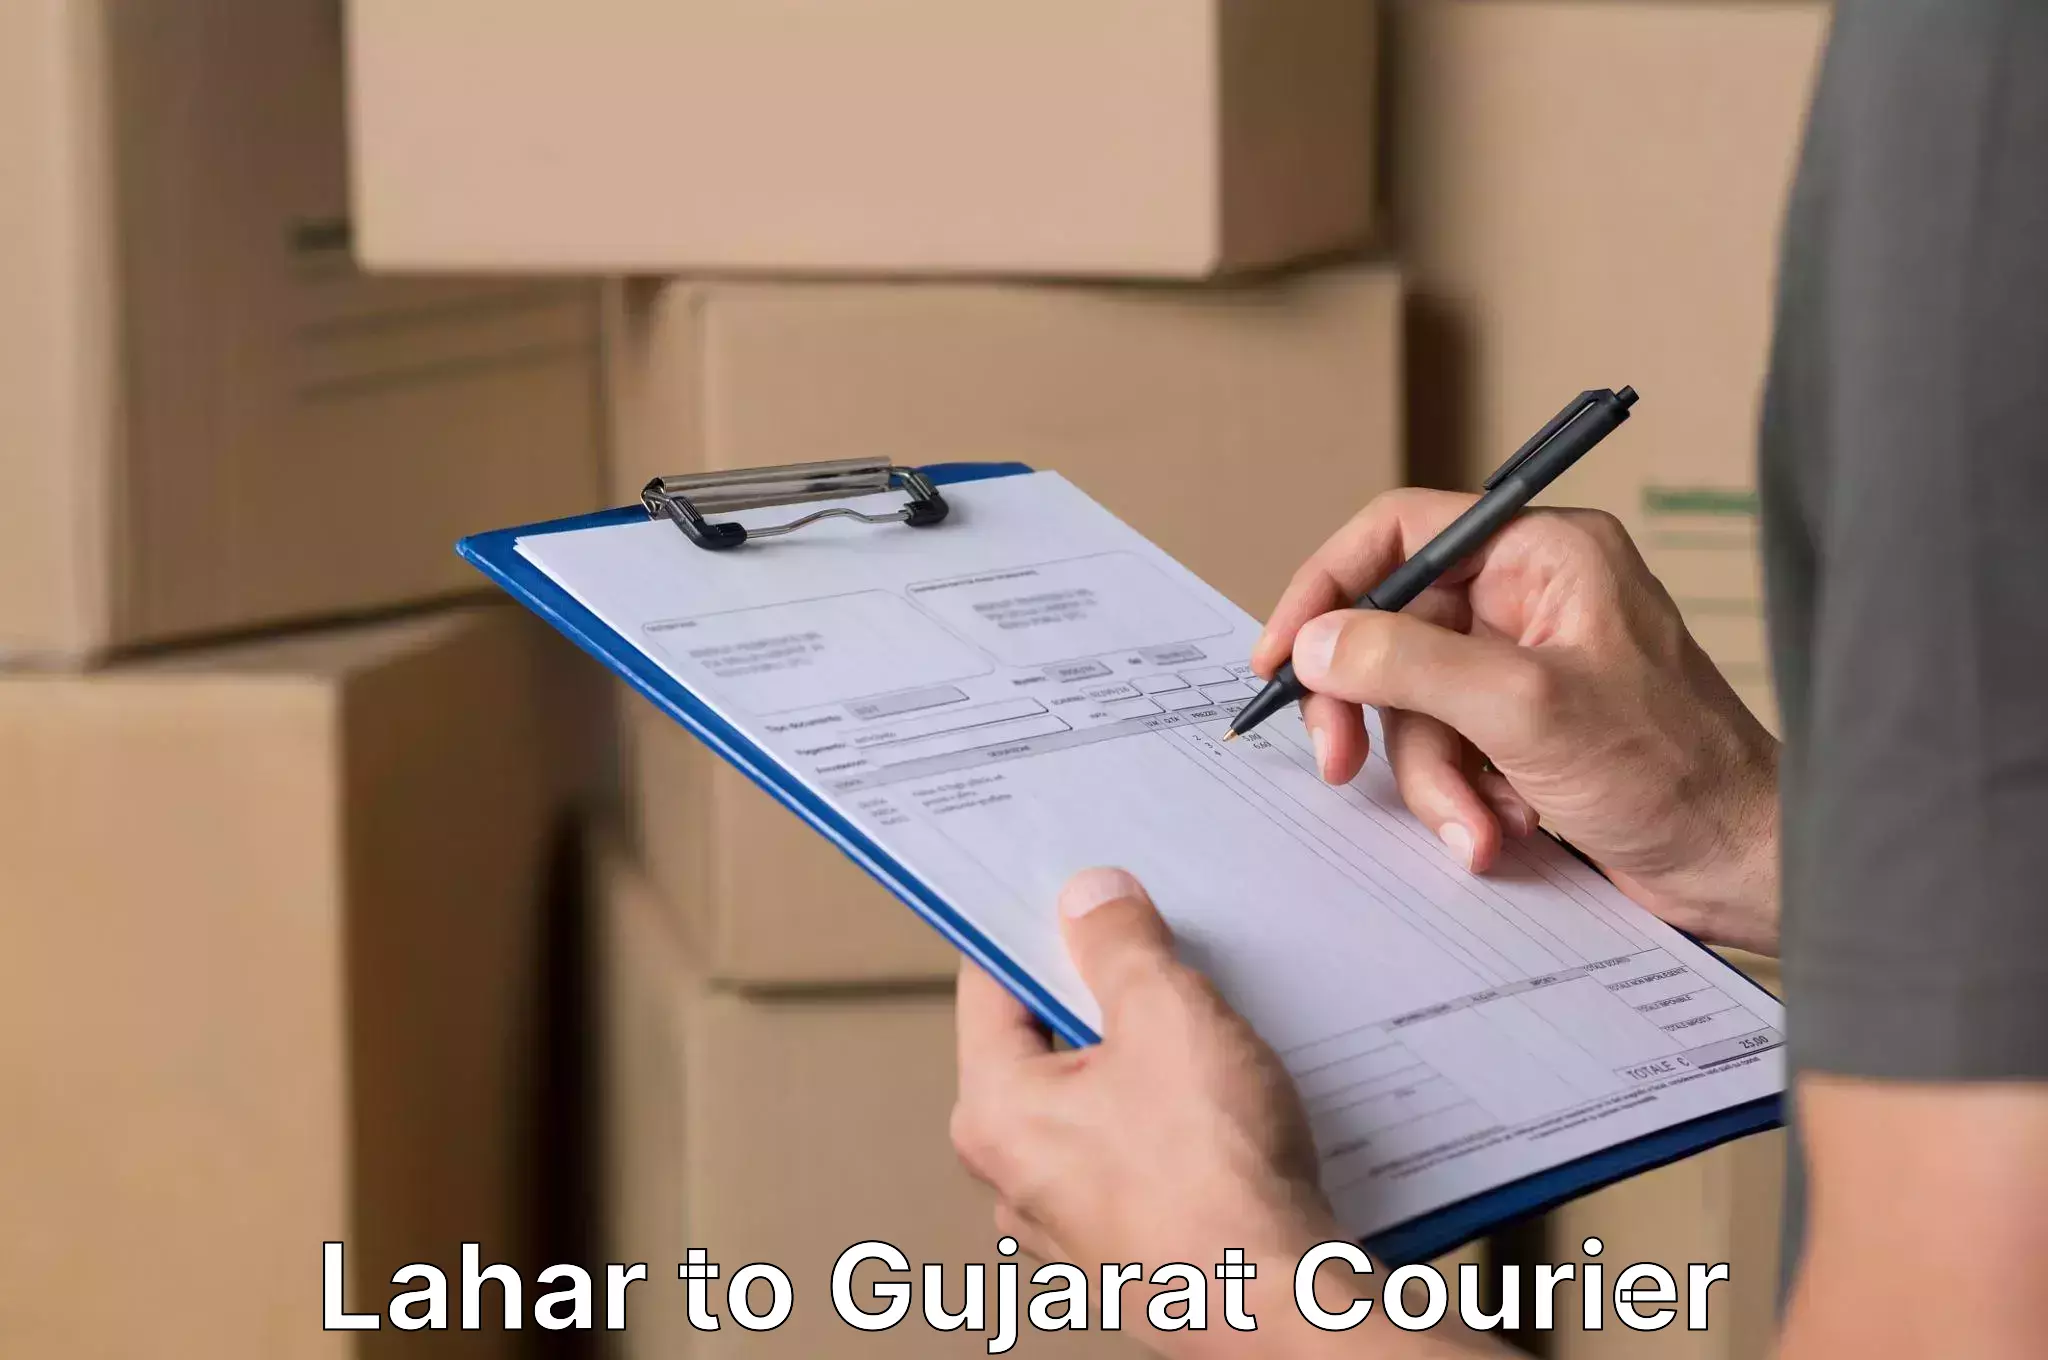 Furniture transport services Lahar to Ahmedabad